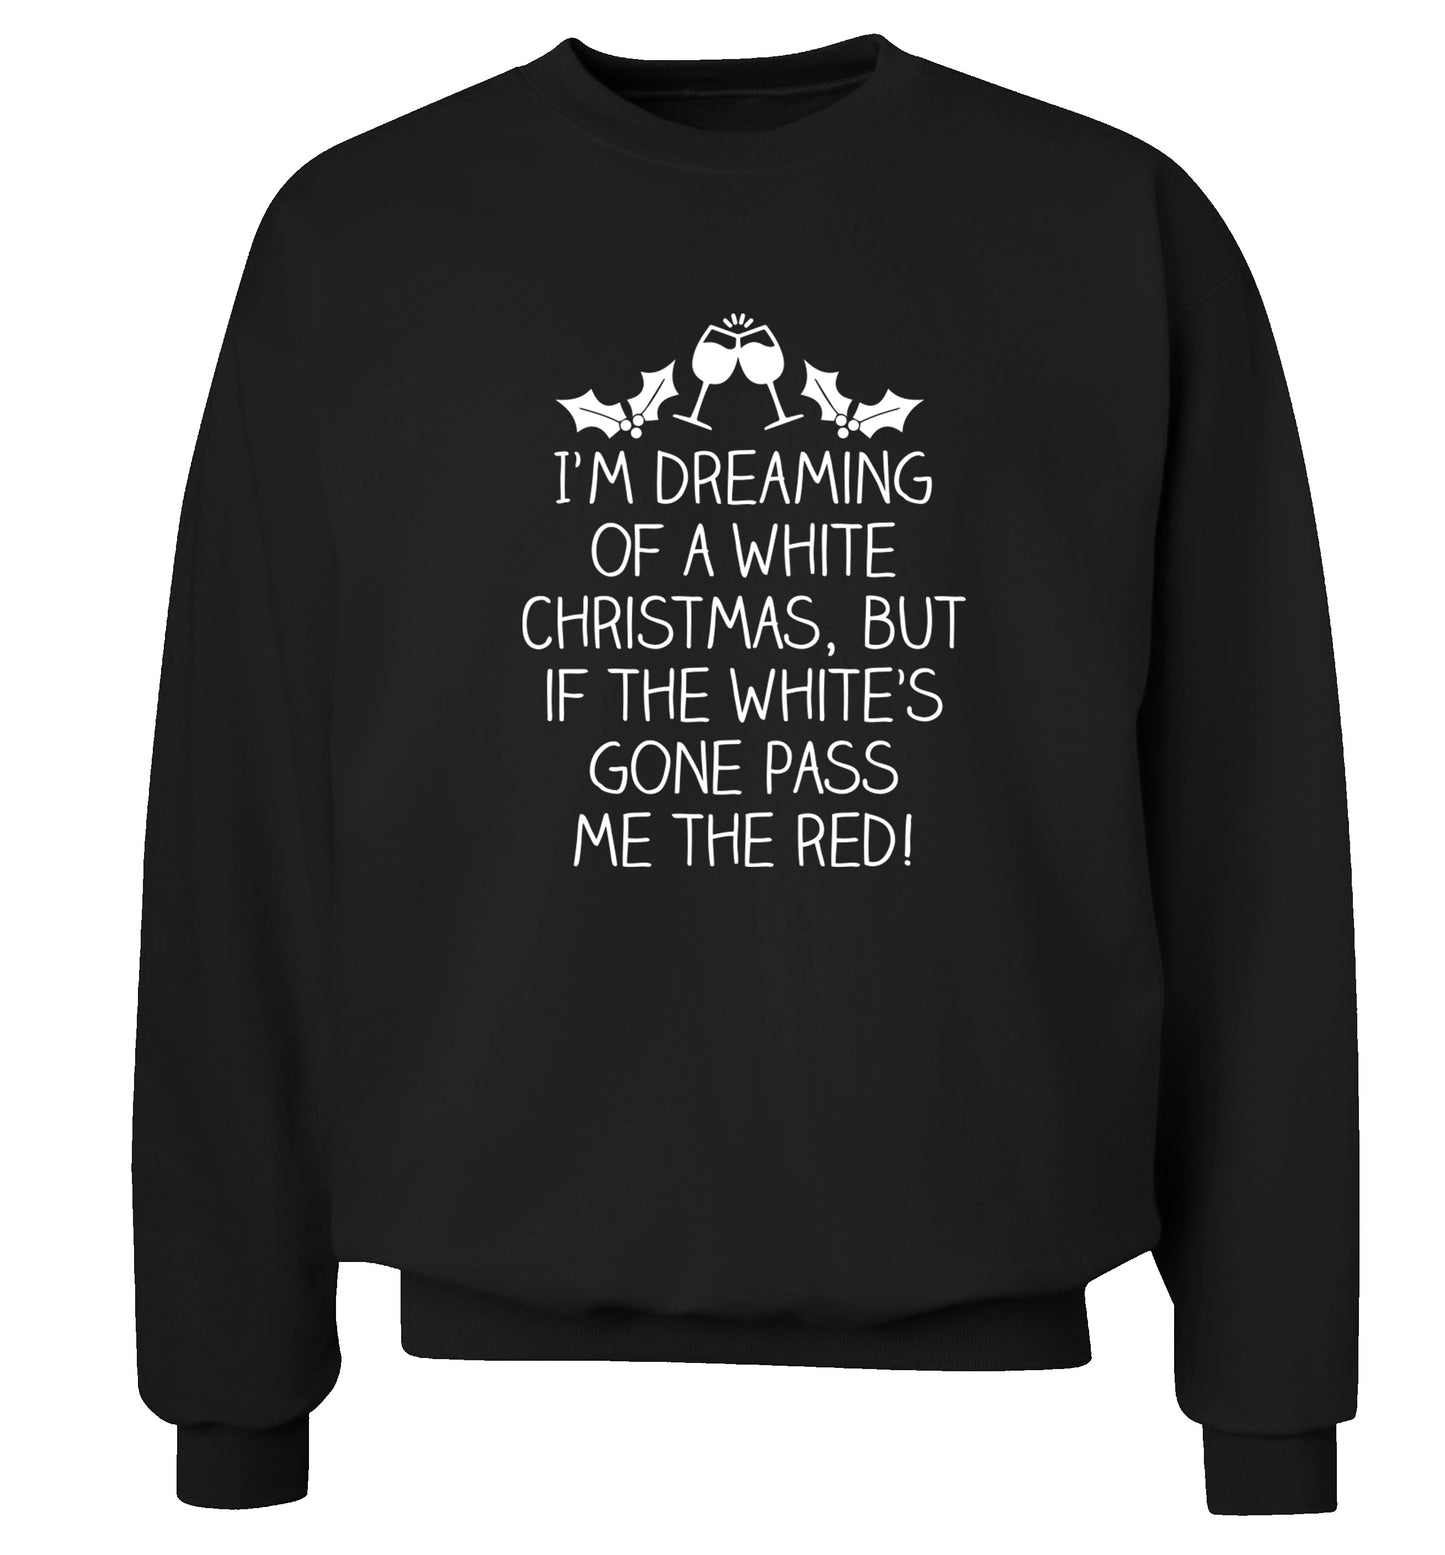 I'm dreaming of a white christmas, but if the white's gone pass me the red! Adult's unisex black Sweater 2XL